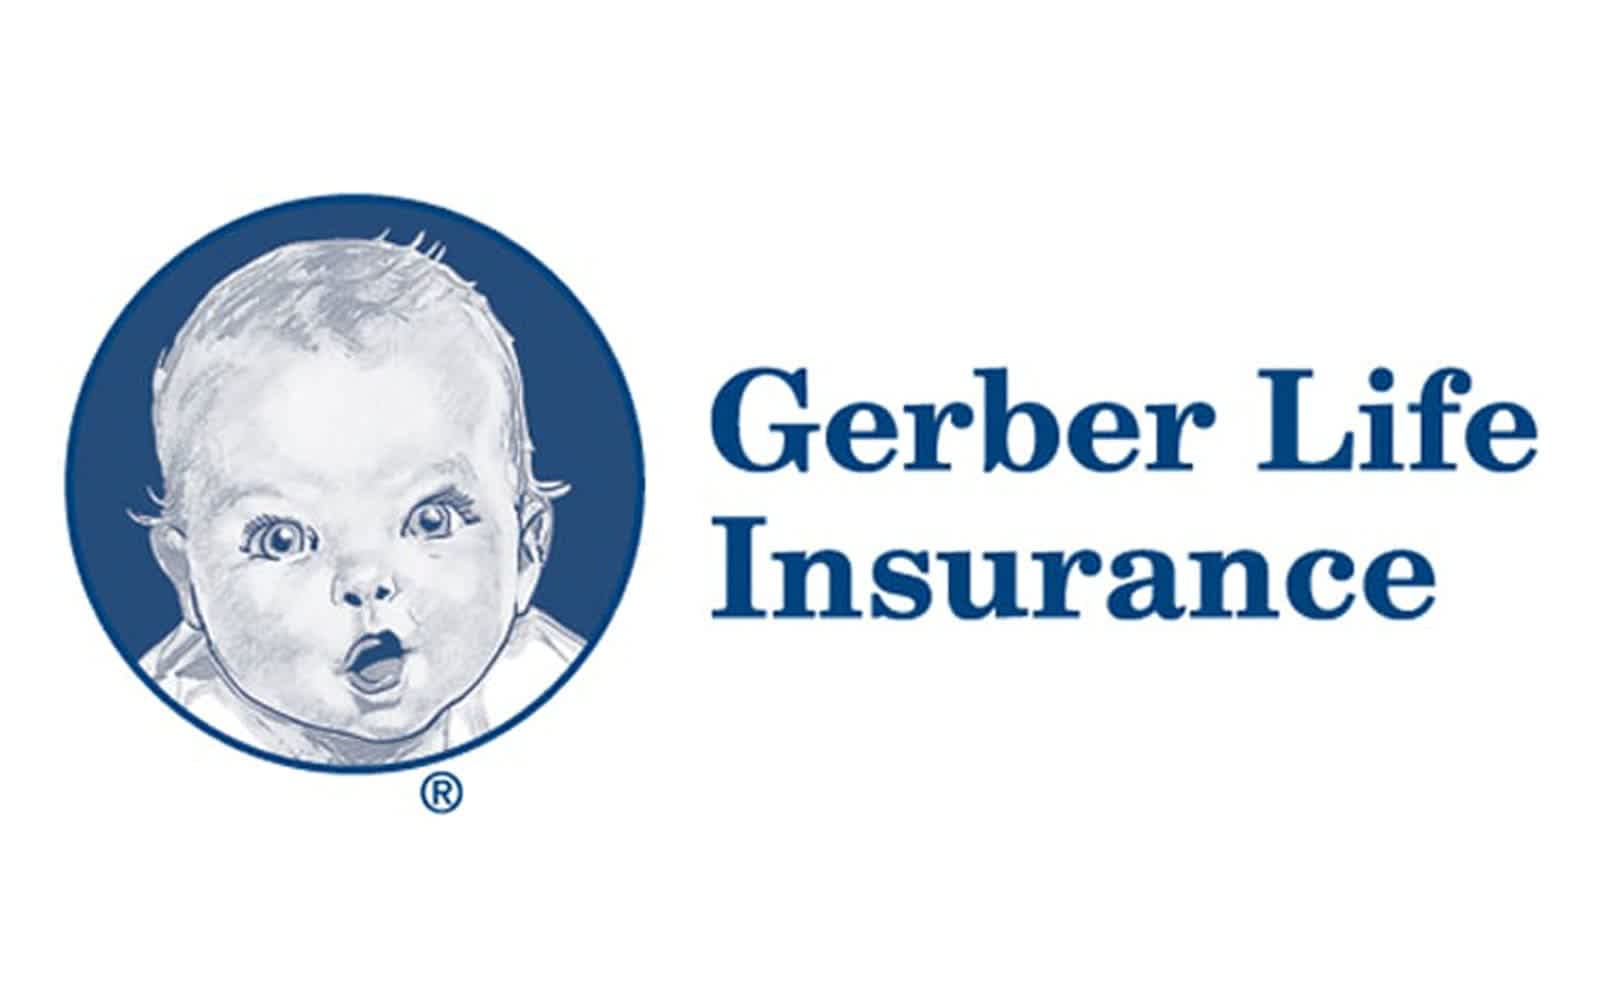 When Can You Cash In A Gerber Life Insurance Policy?